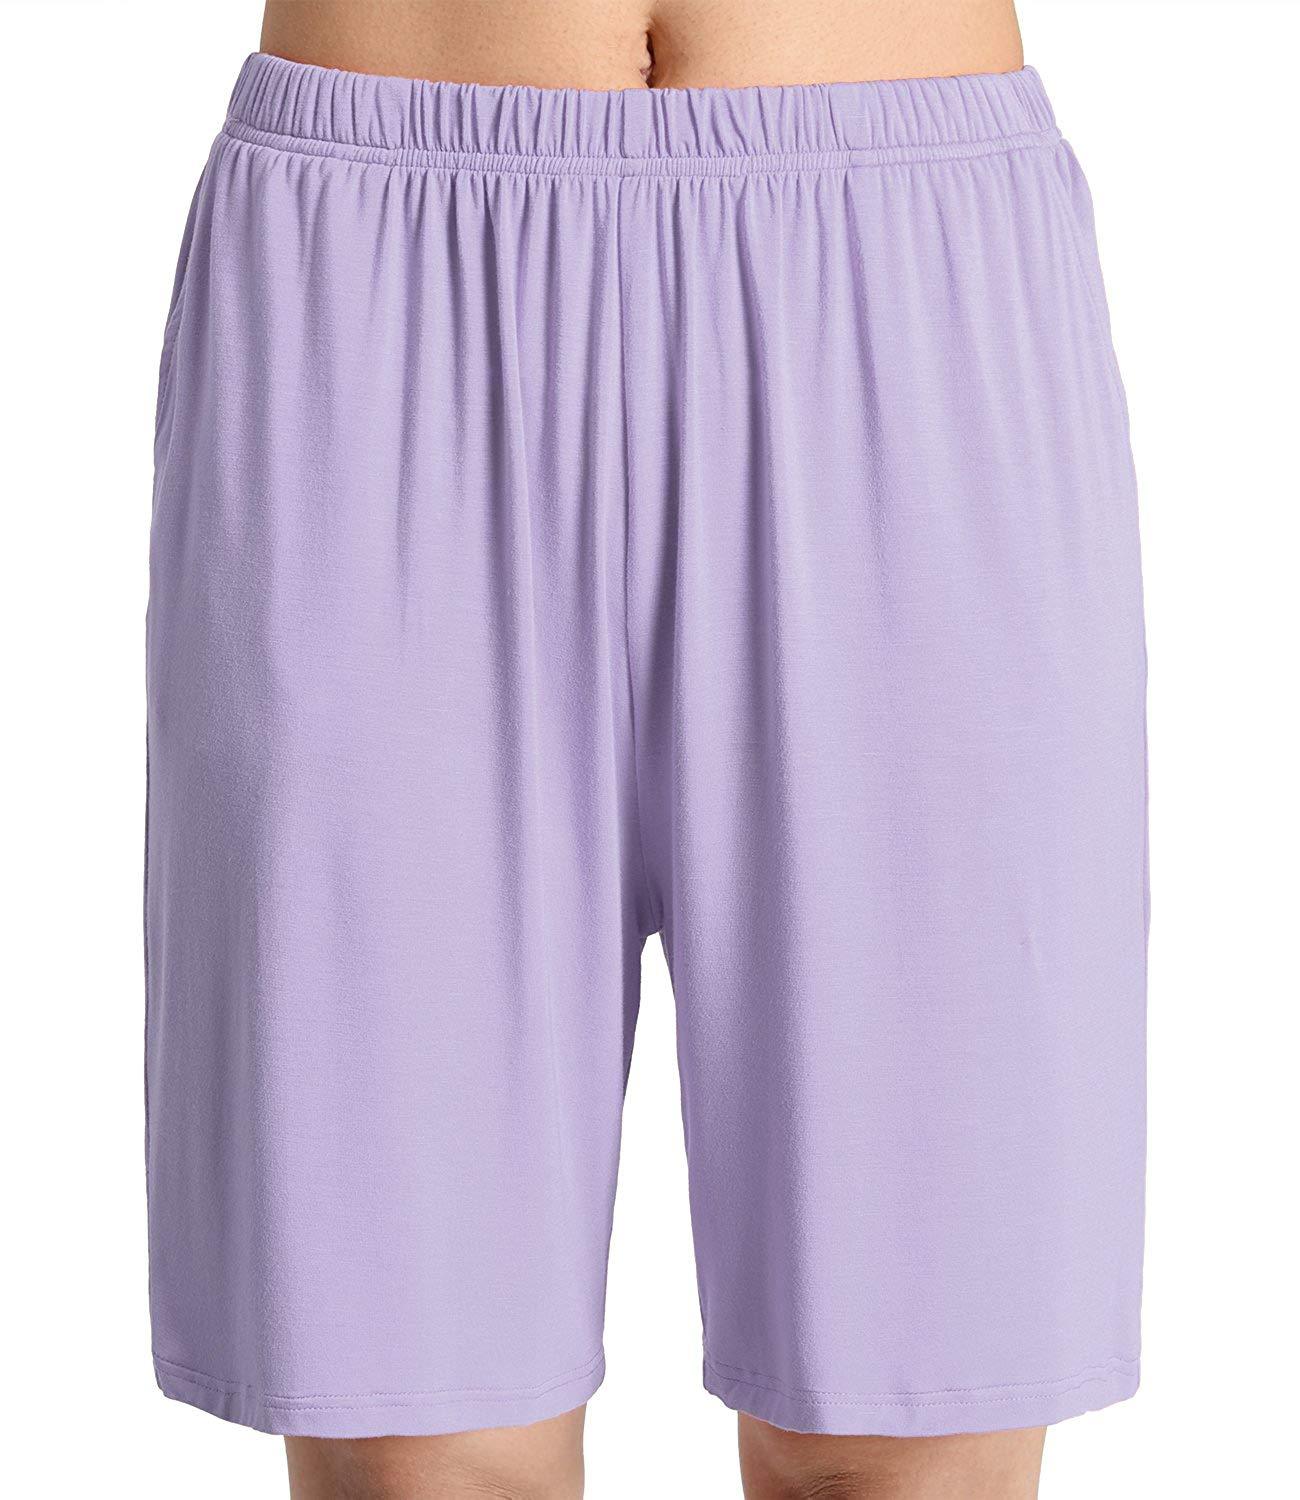 Women Pajama Shorts Comfy Lounge Bottom with Pockets Drawstring Pj Bottoms Sleep  Shorts for Yoga Gym Running, Pink+grey, X-Large : Buy Online at Best Price  in KSA - Souq is now 